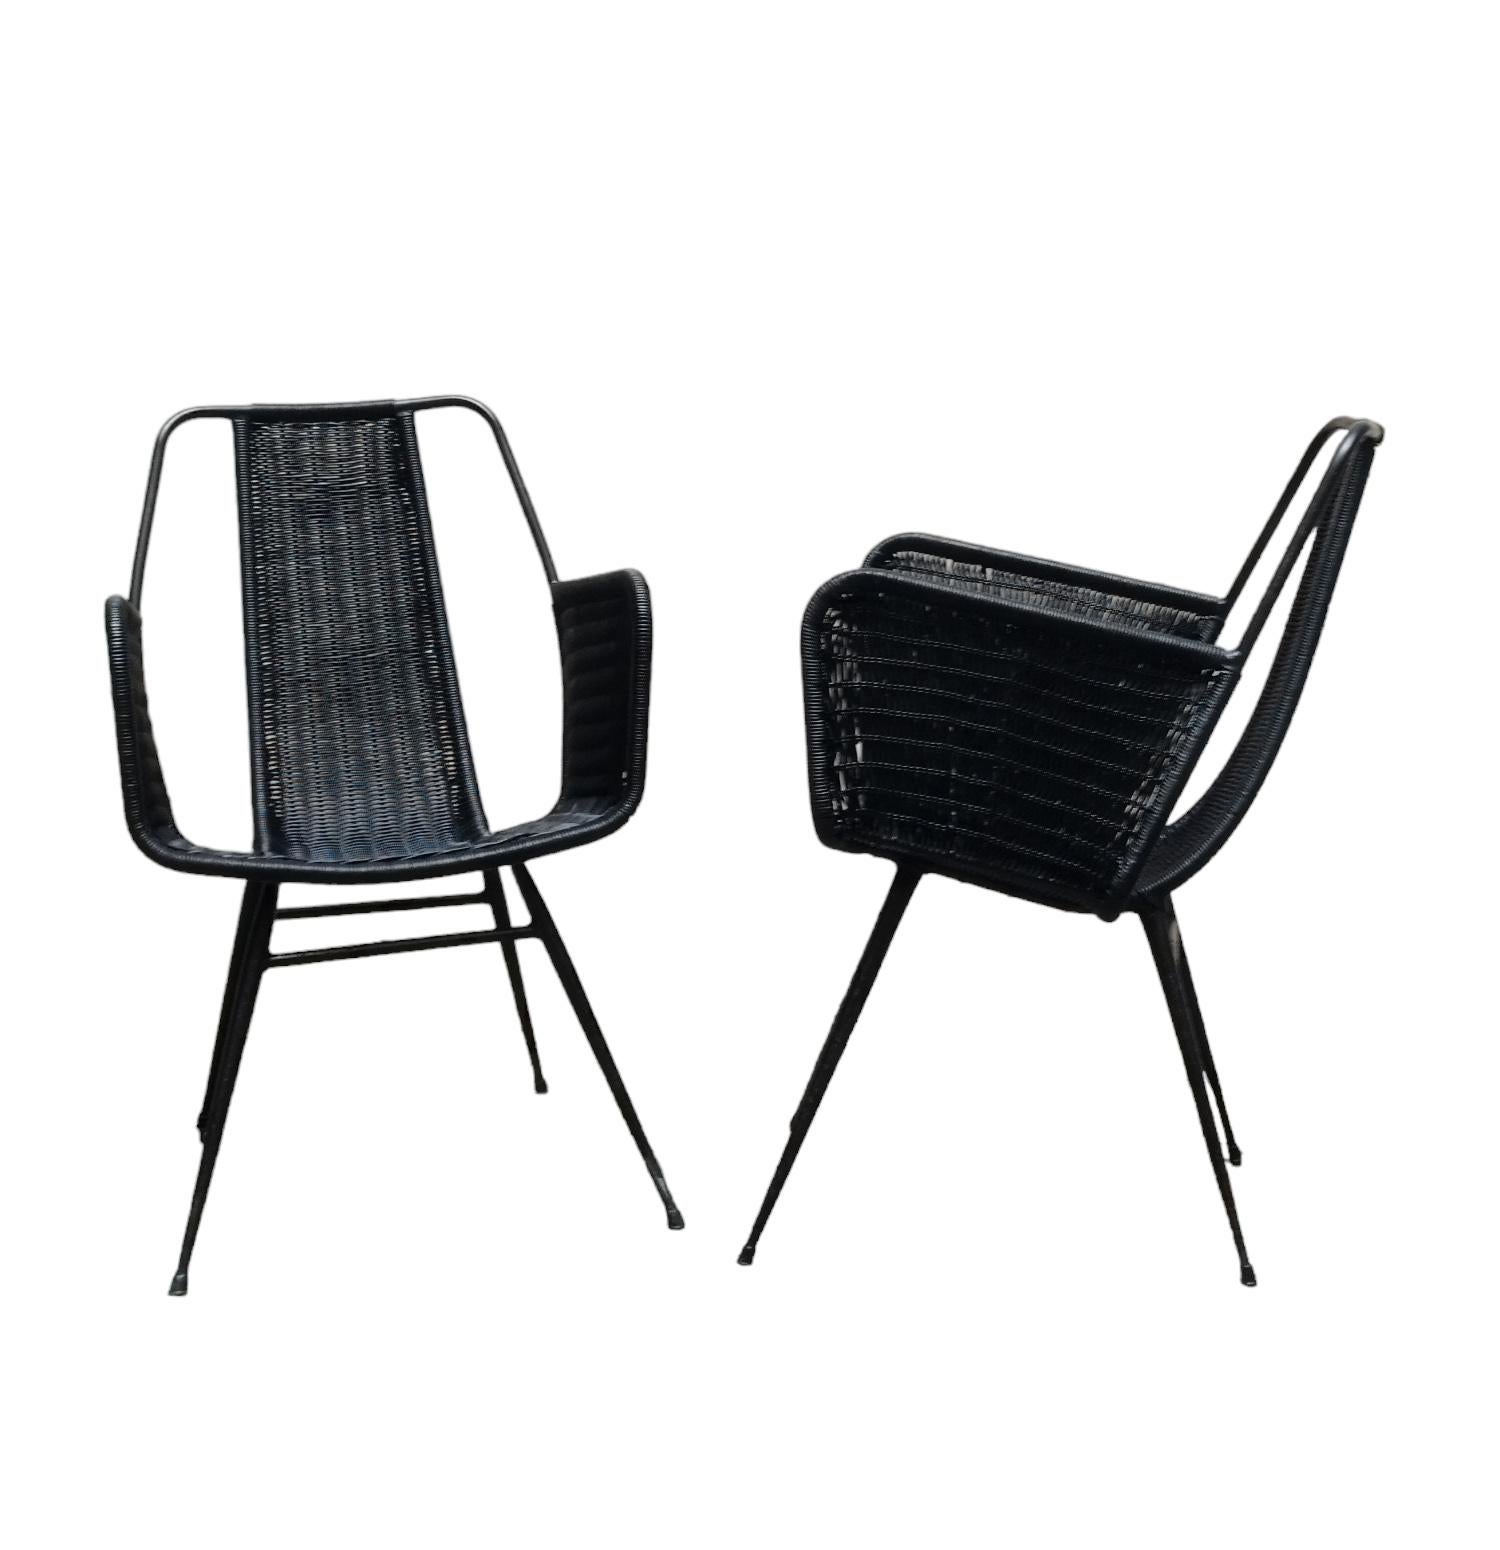 Gastone Rinaldi, Pair of Outdoor Armchairs in Woven Plastic, Italy 1960s/70s In Good Condition For Sale In Naples, IT